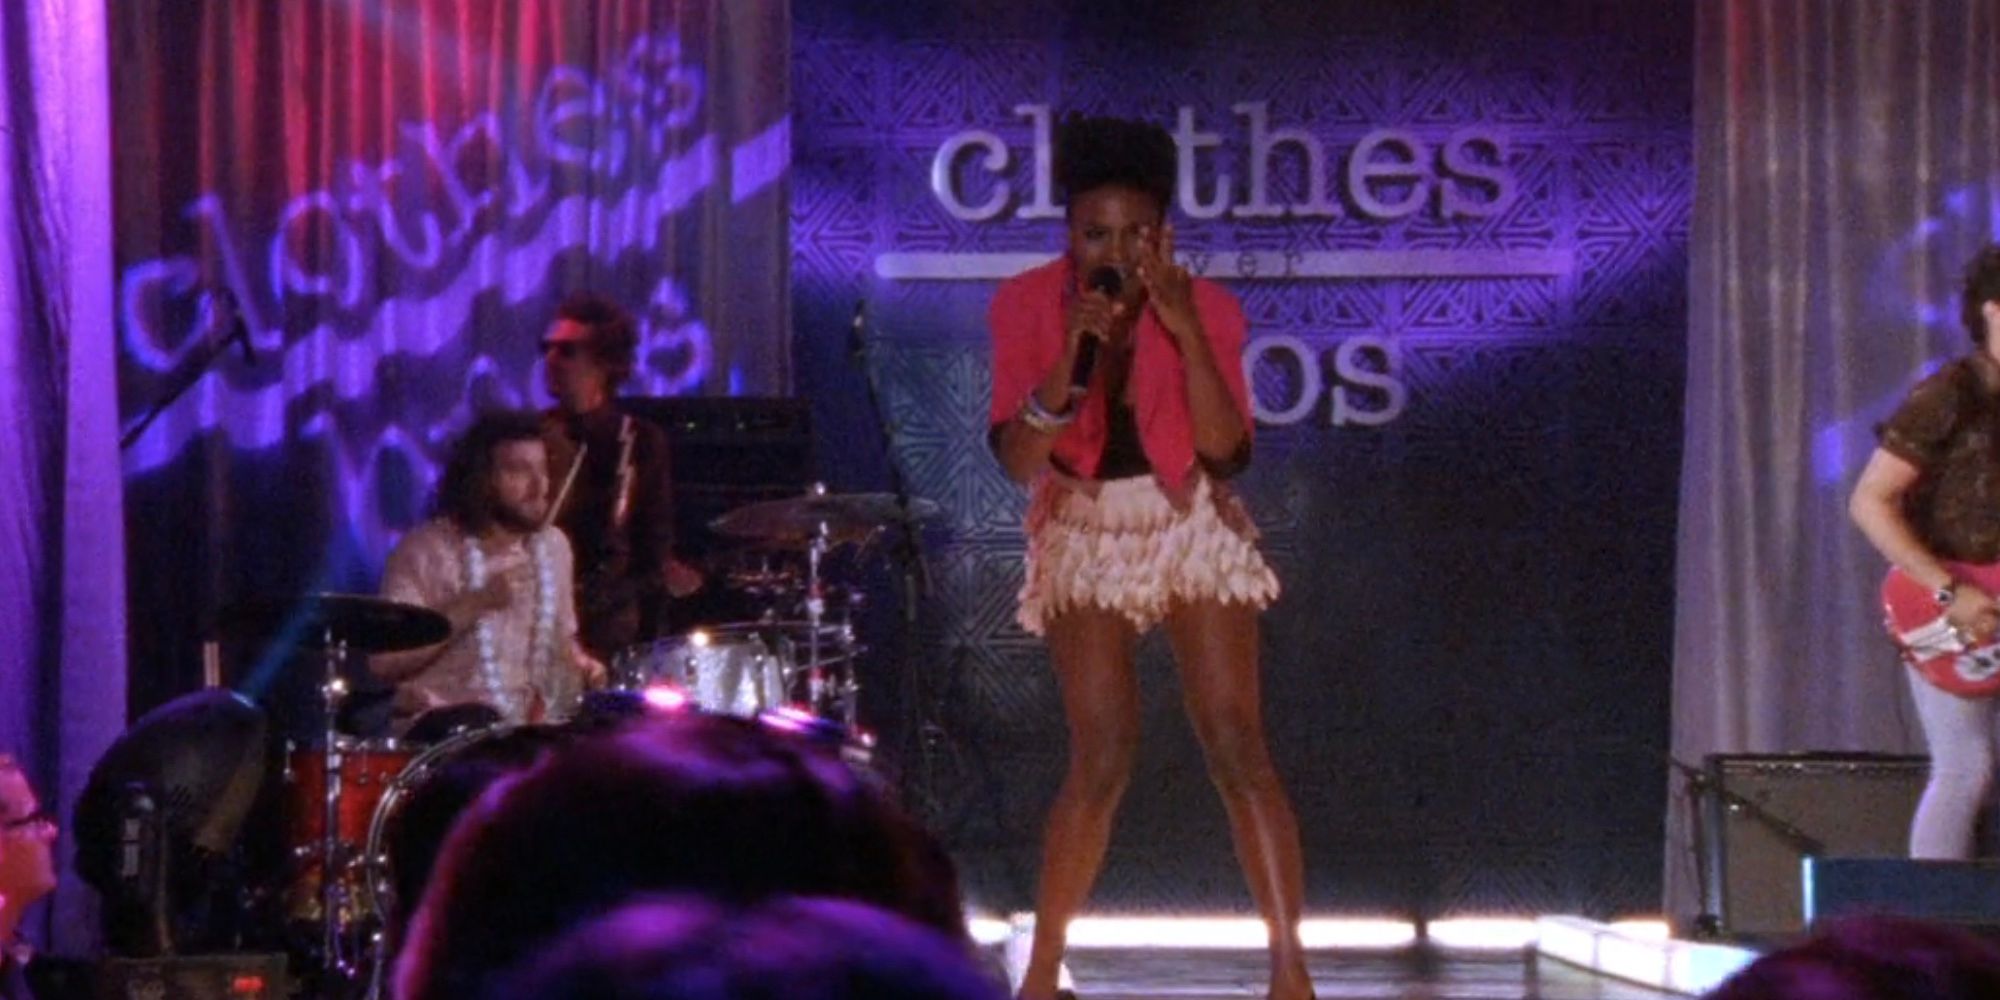 Noisettes performing on One Tree Hill